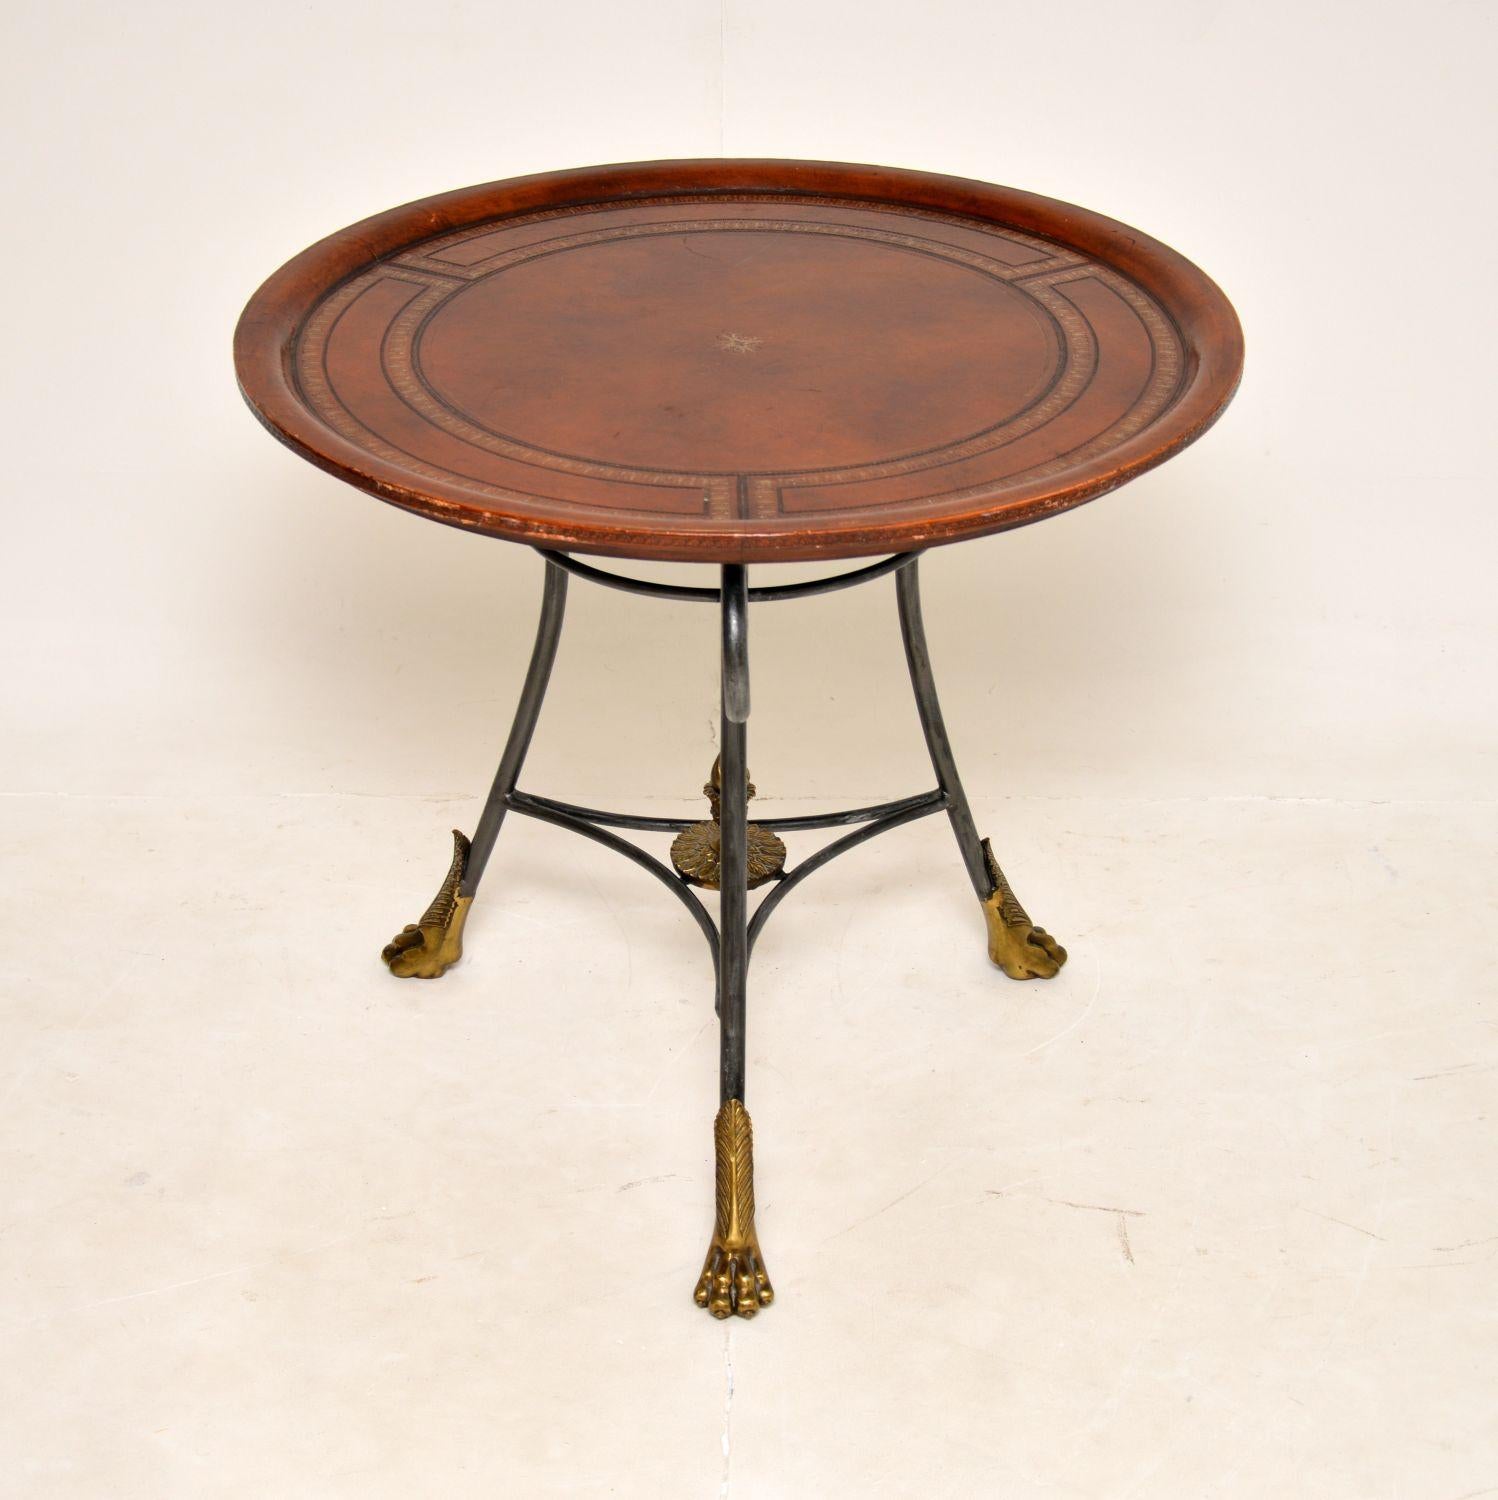 A beautiful and very well made antique gueridon table, made in England and dating from around the 1950’s.

This is of superb quality and it is a useful size. The top is completely leather bound, with a gorgeous colour tone and lovely gold tooling.